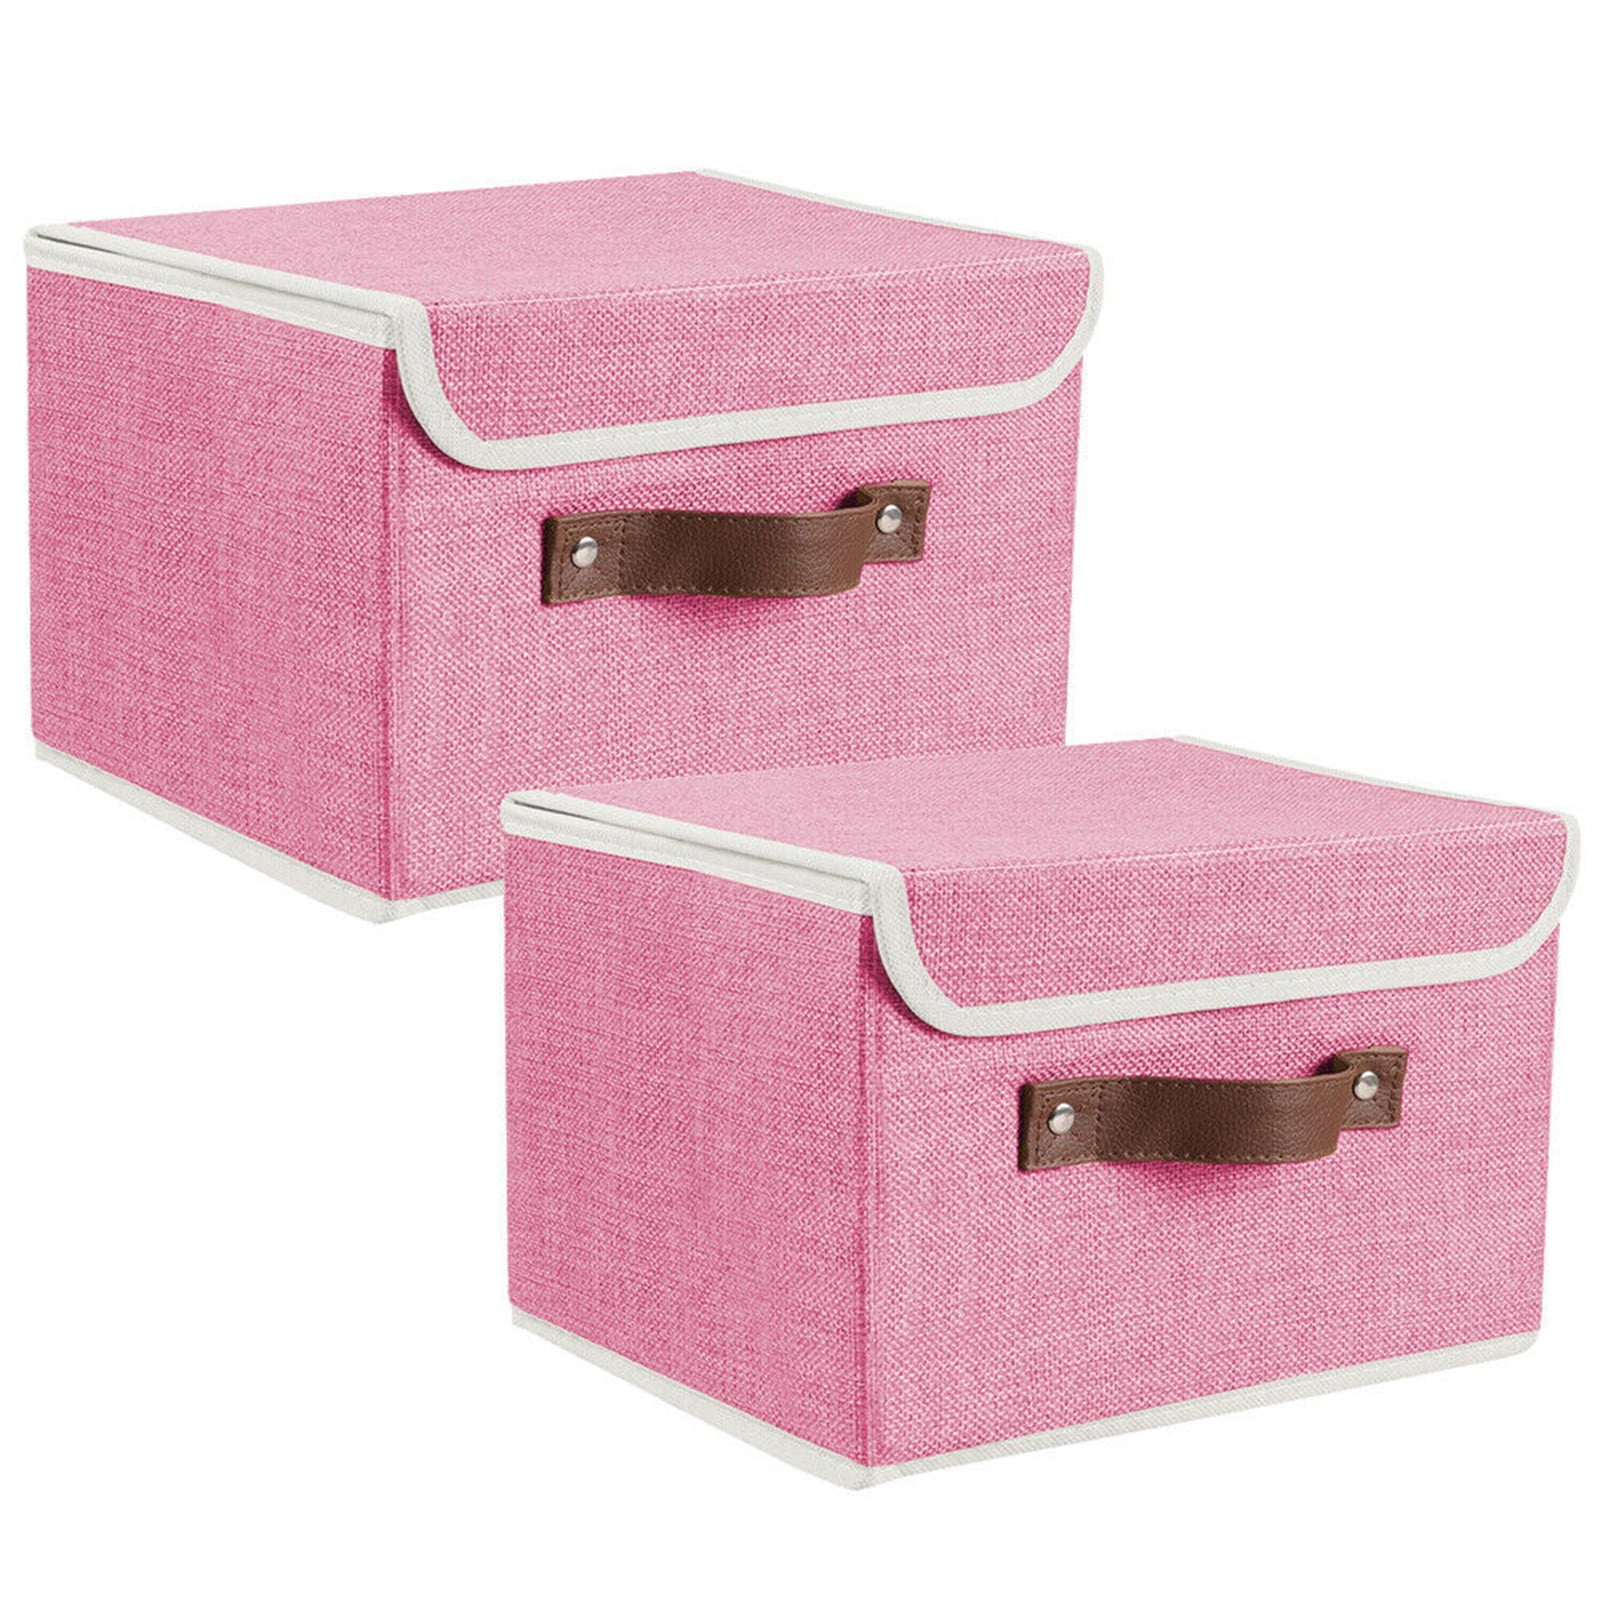 Details about   12Pcs Foldable Storage Bin Cube Box with Lid Linen Fabric Container Basket Pink 